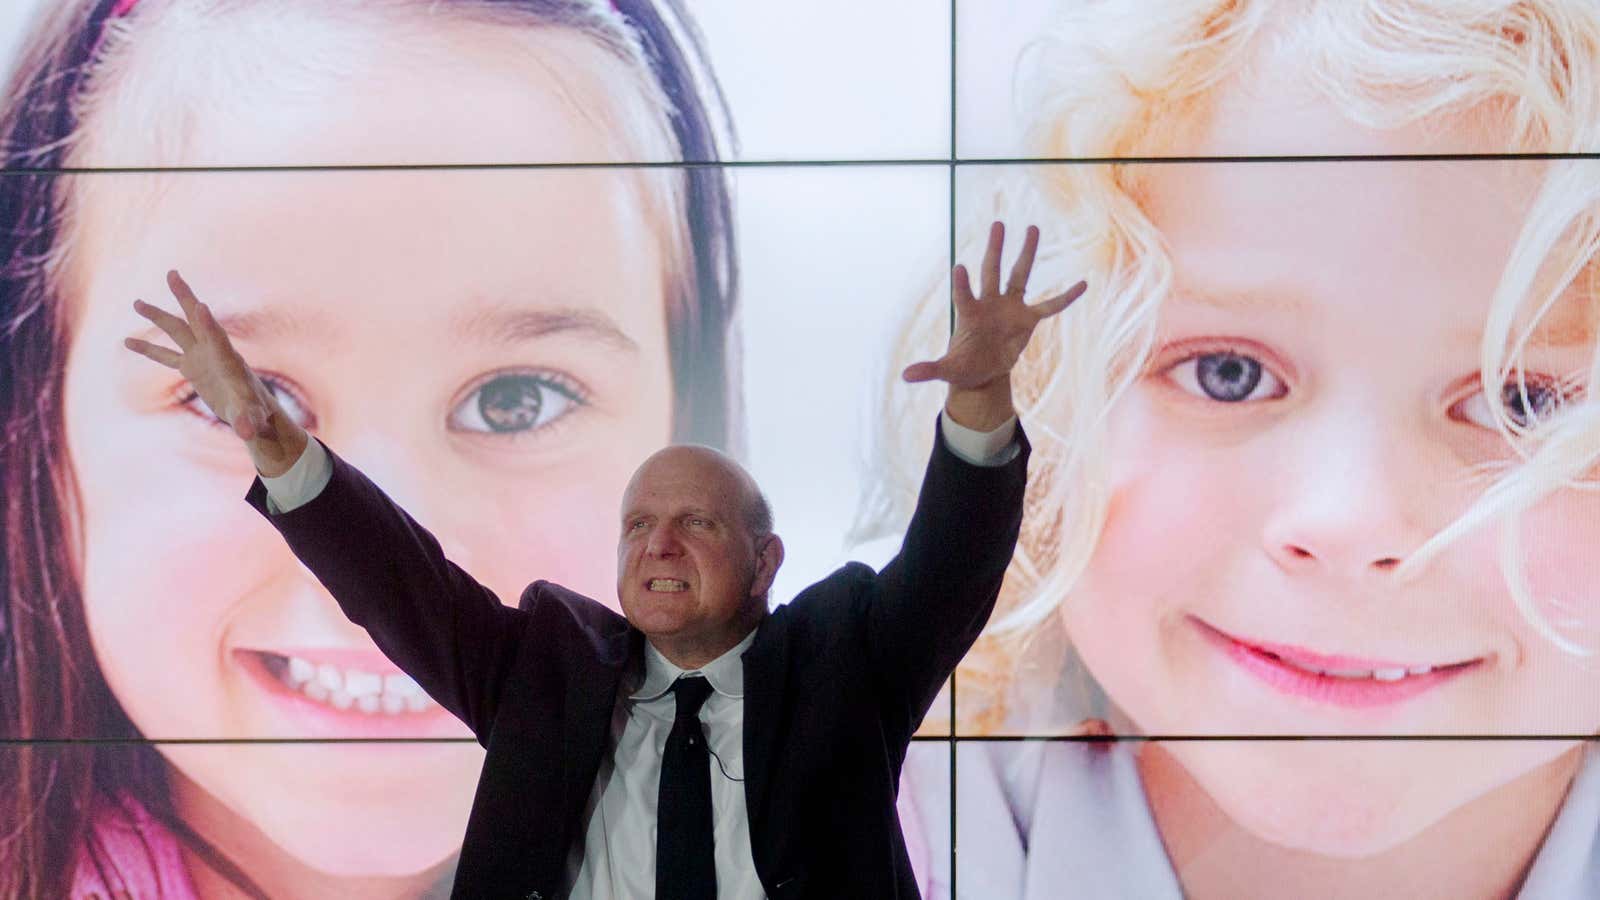 The children of Ballmer are ready to be set free.